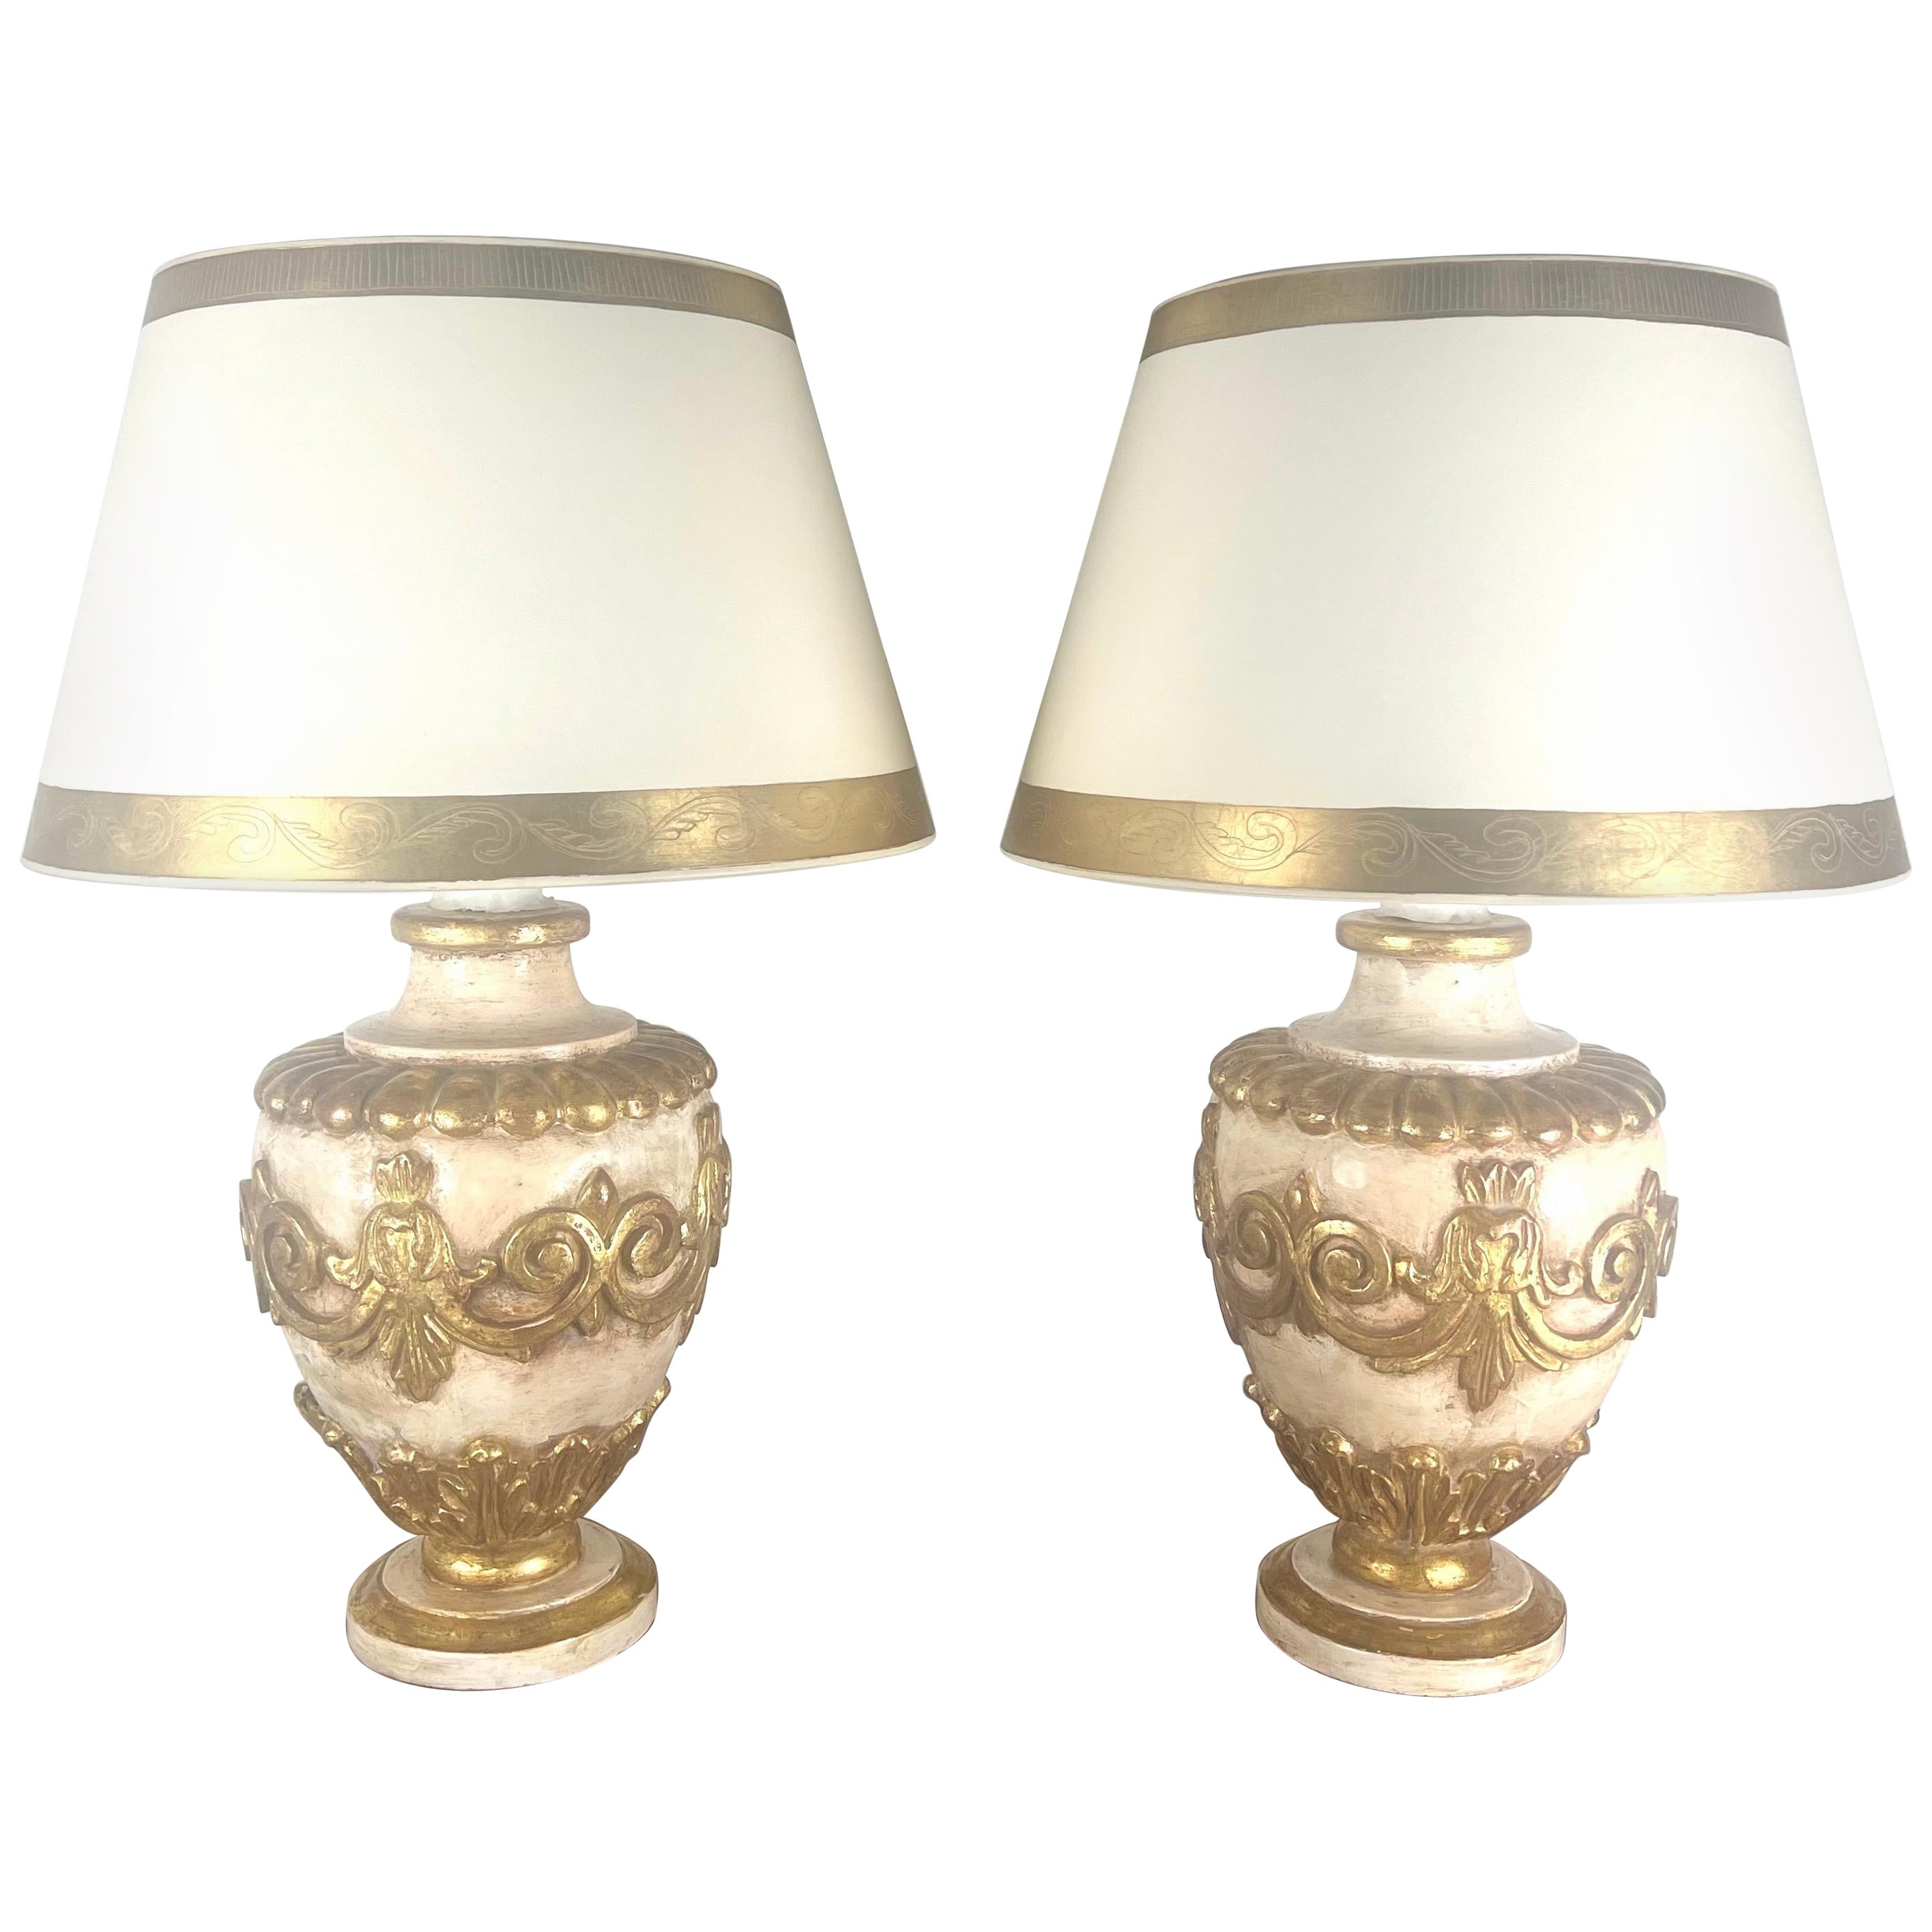 Pair of Italian Painted & Parcel Gilt Lamps w/ Parchment Shades